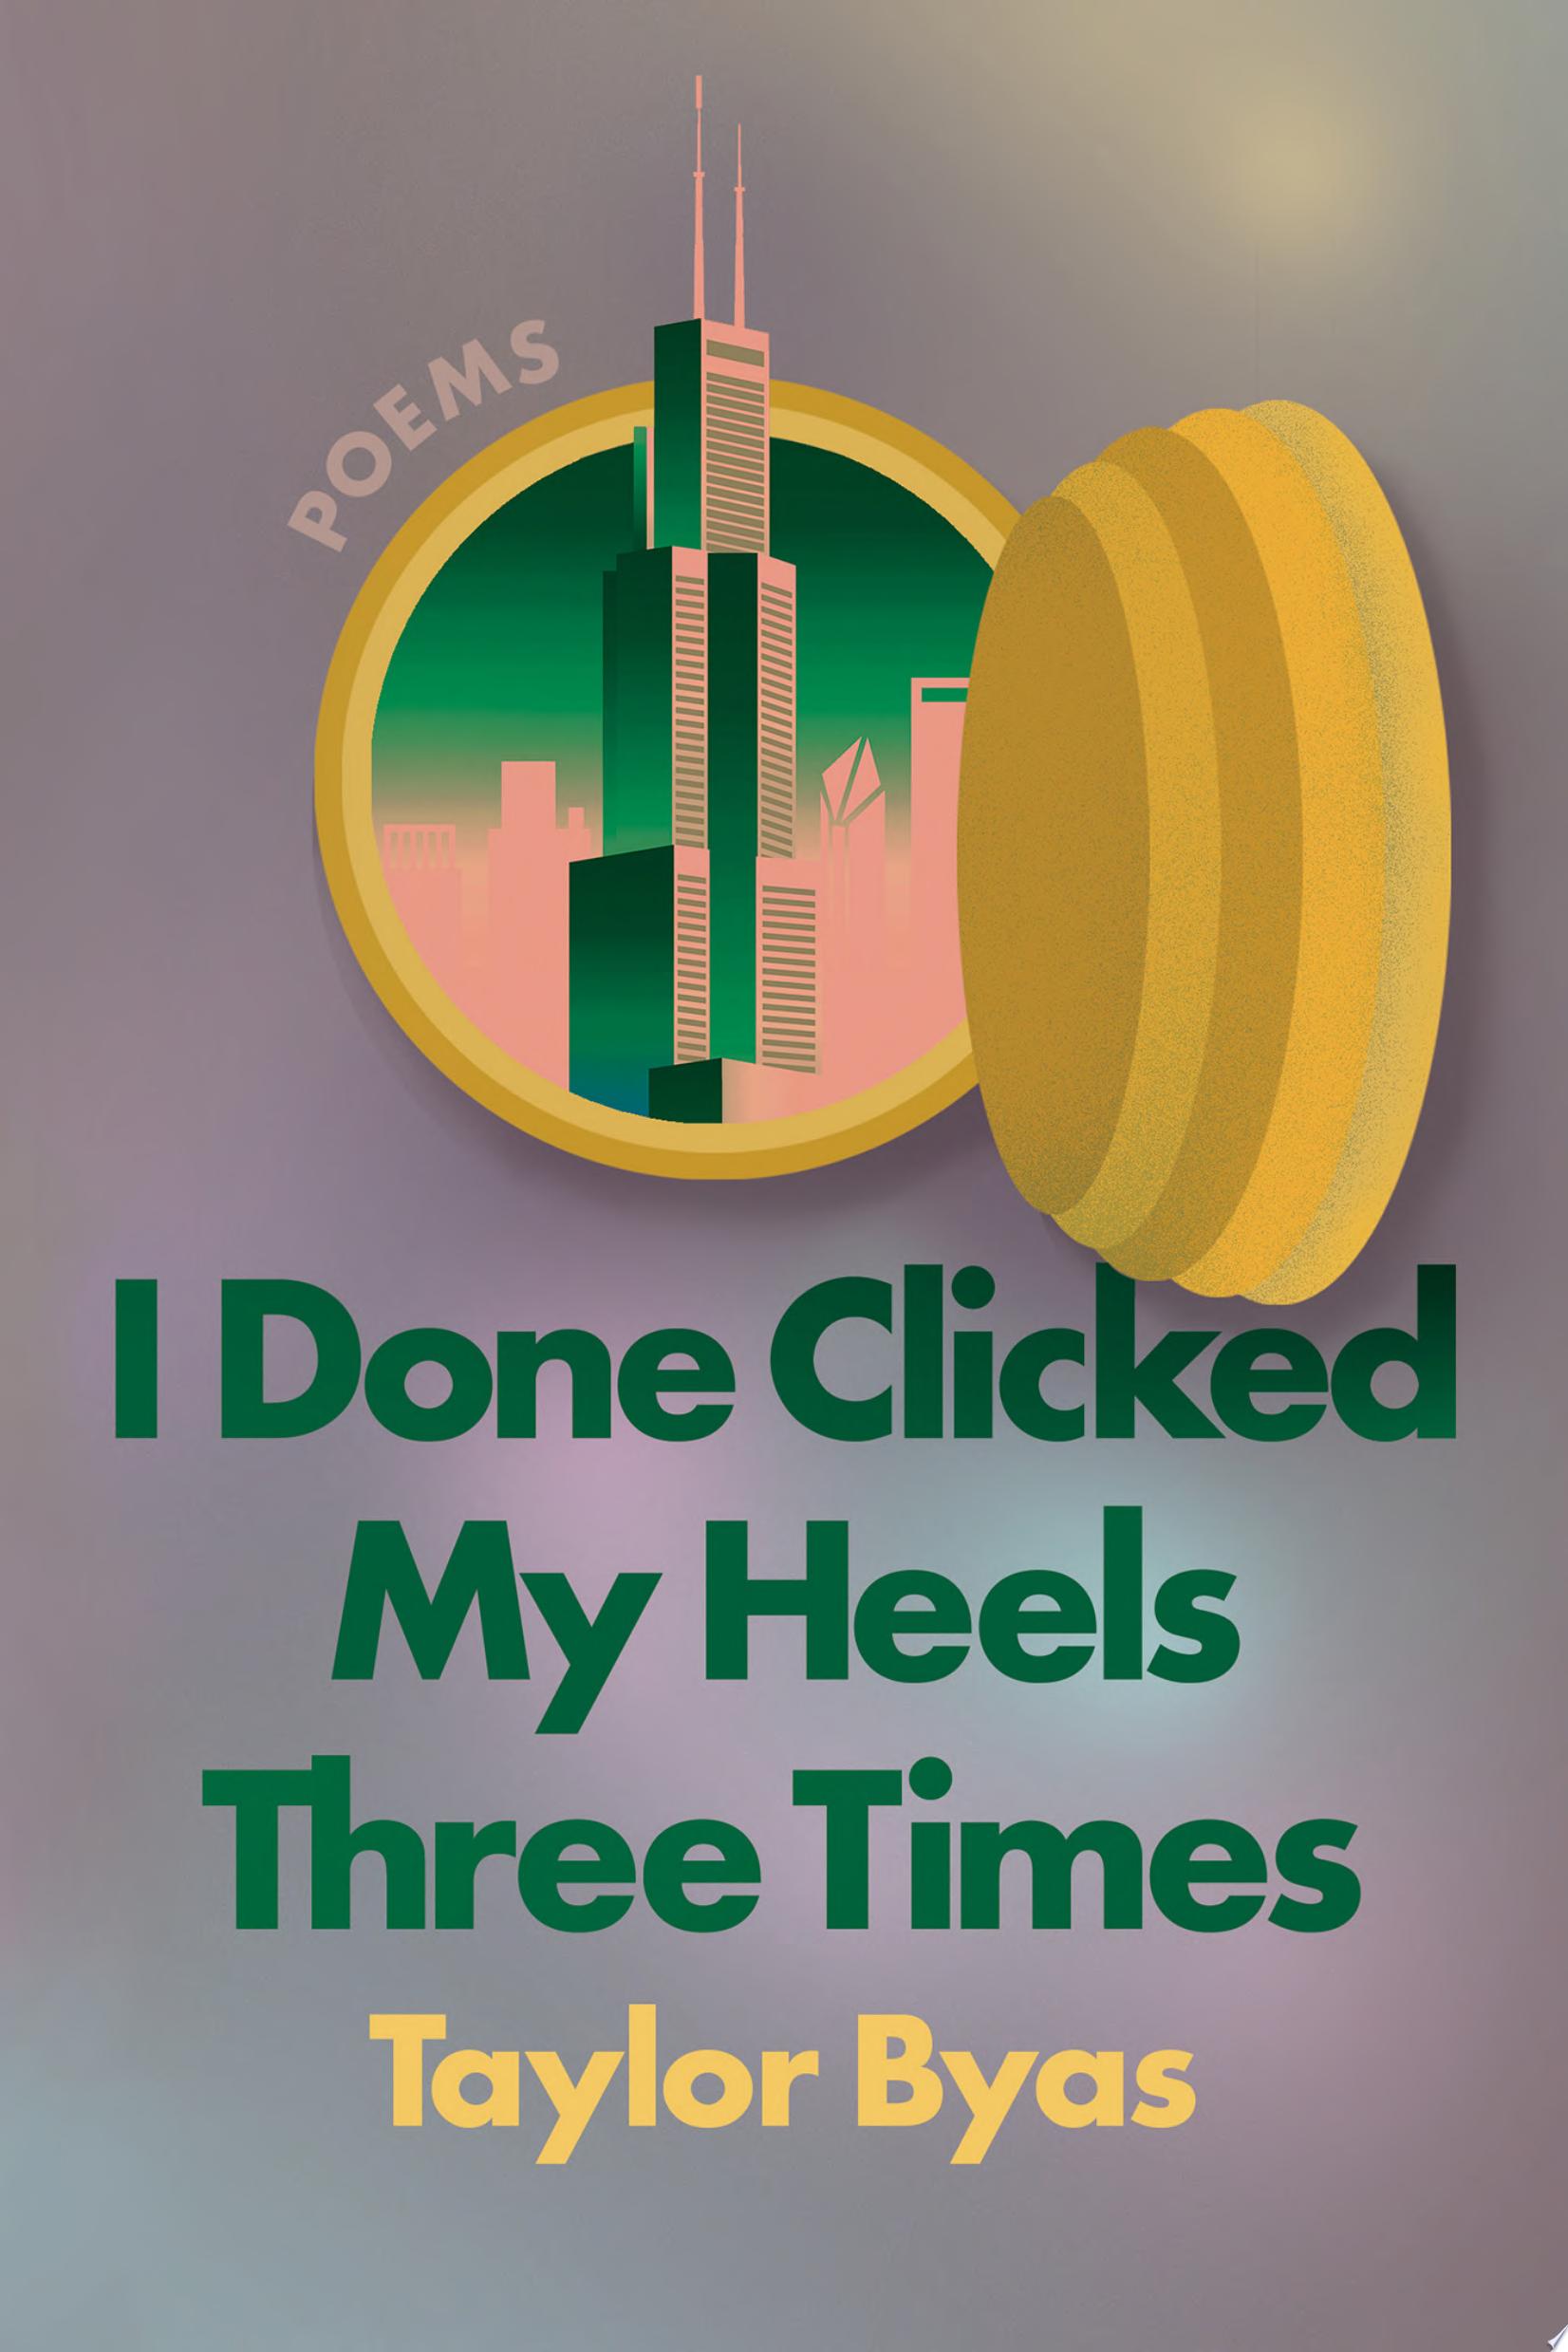 Image for "I Done Clicked My Heels Three Times"